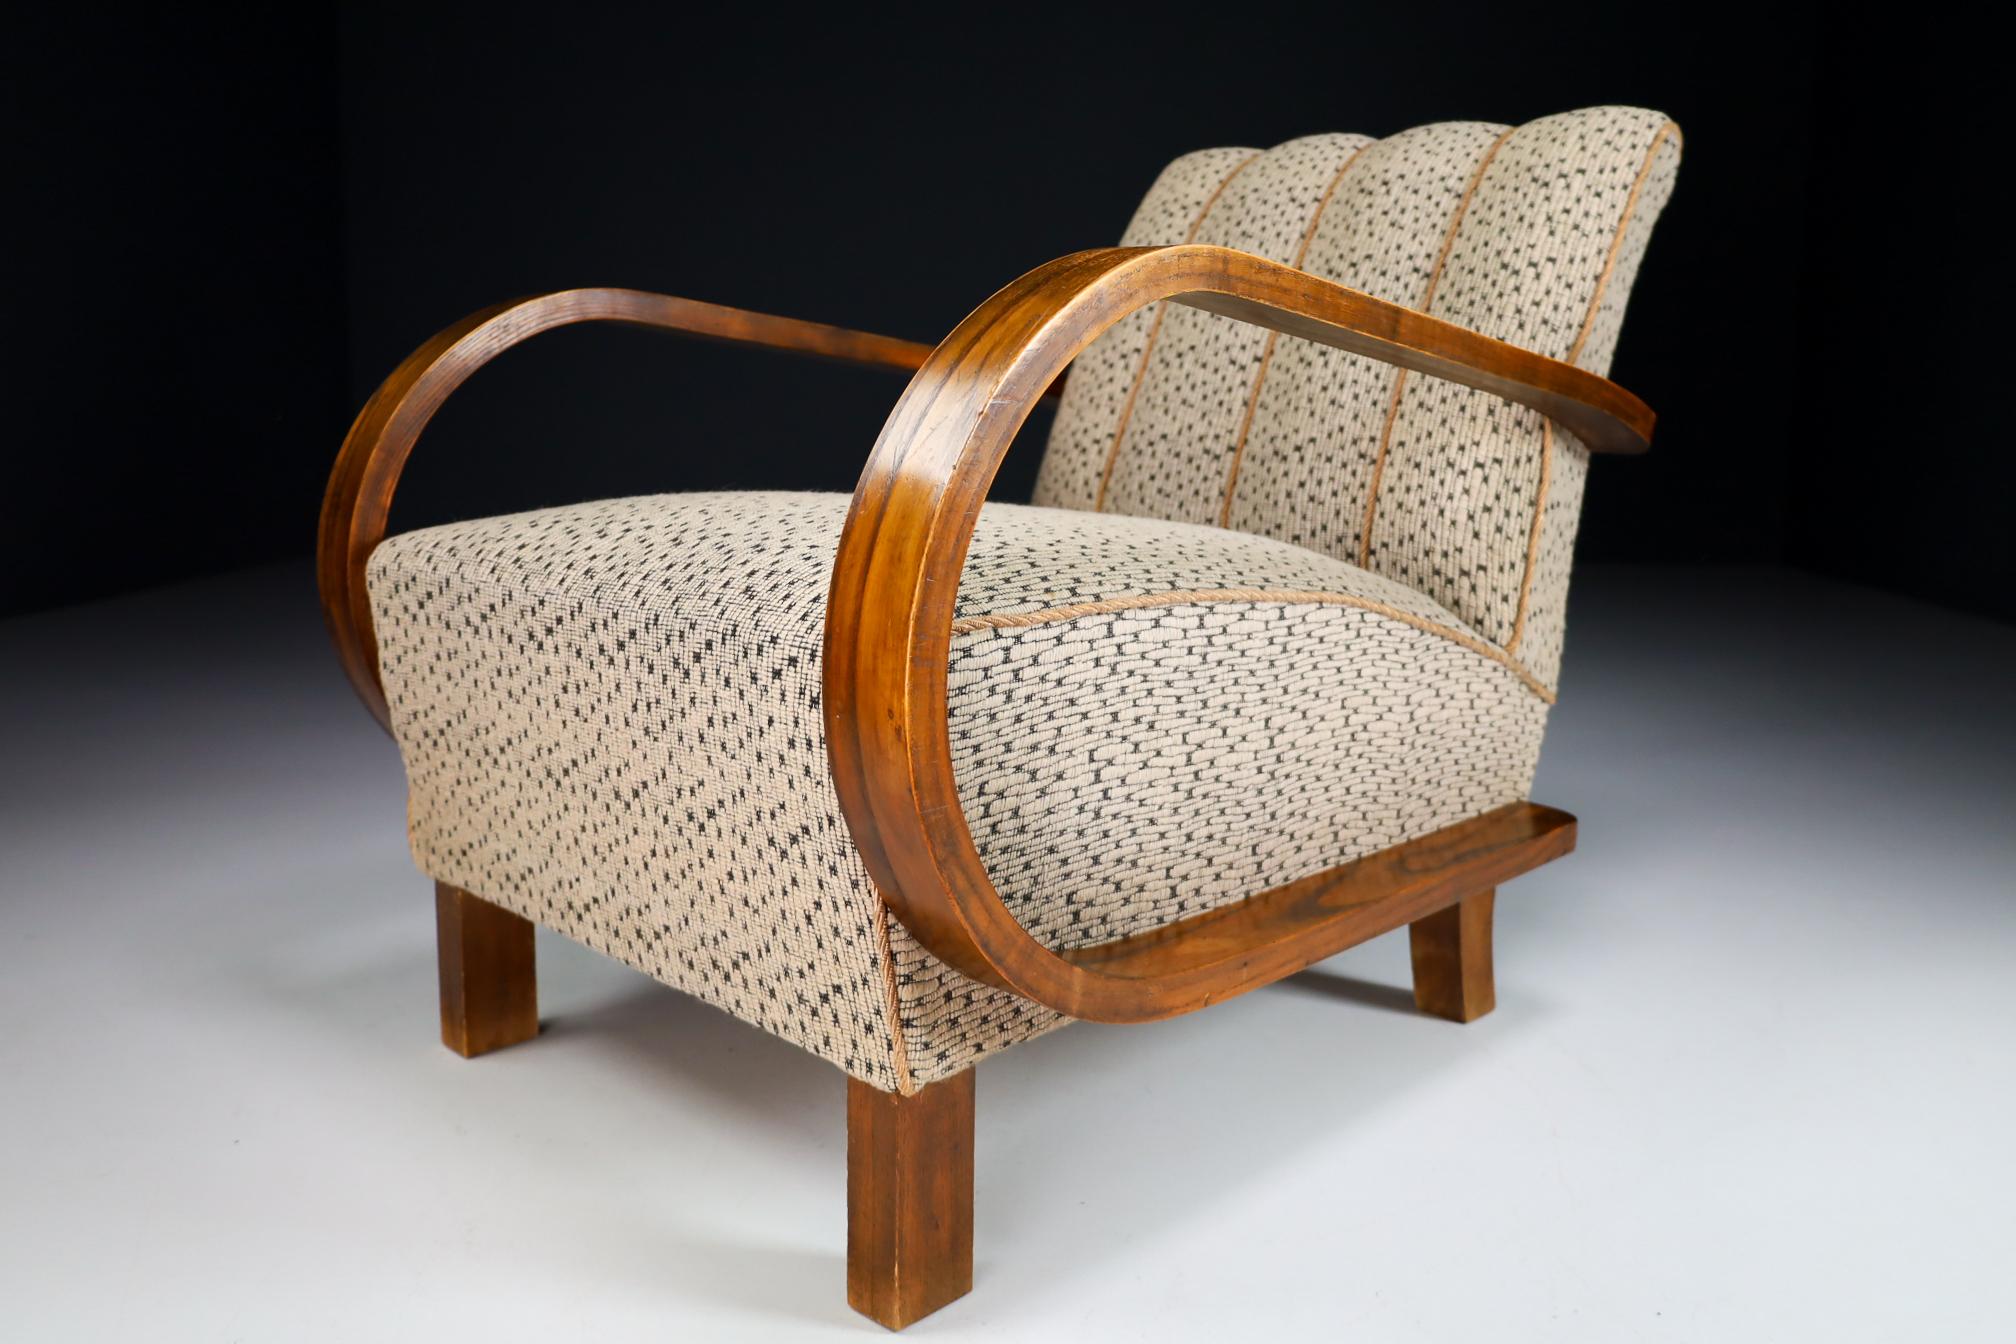 Art-Deco Armchairs in Bentwood and Original Fabric, Austria, 1930s For Sale 2